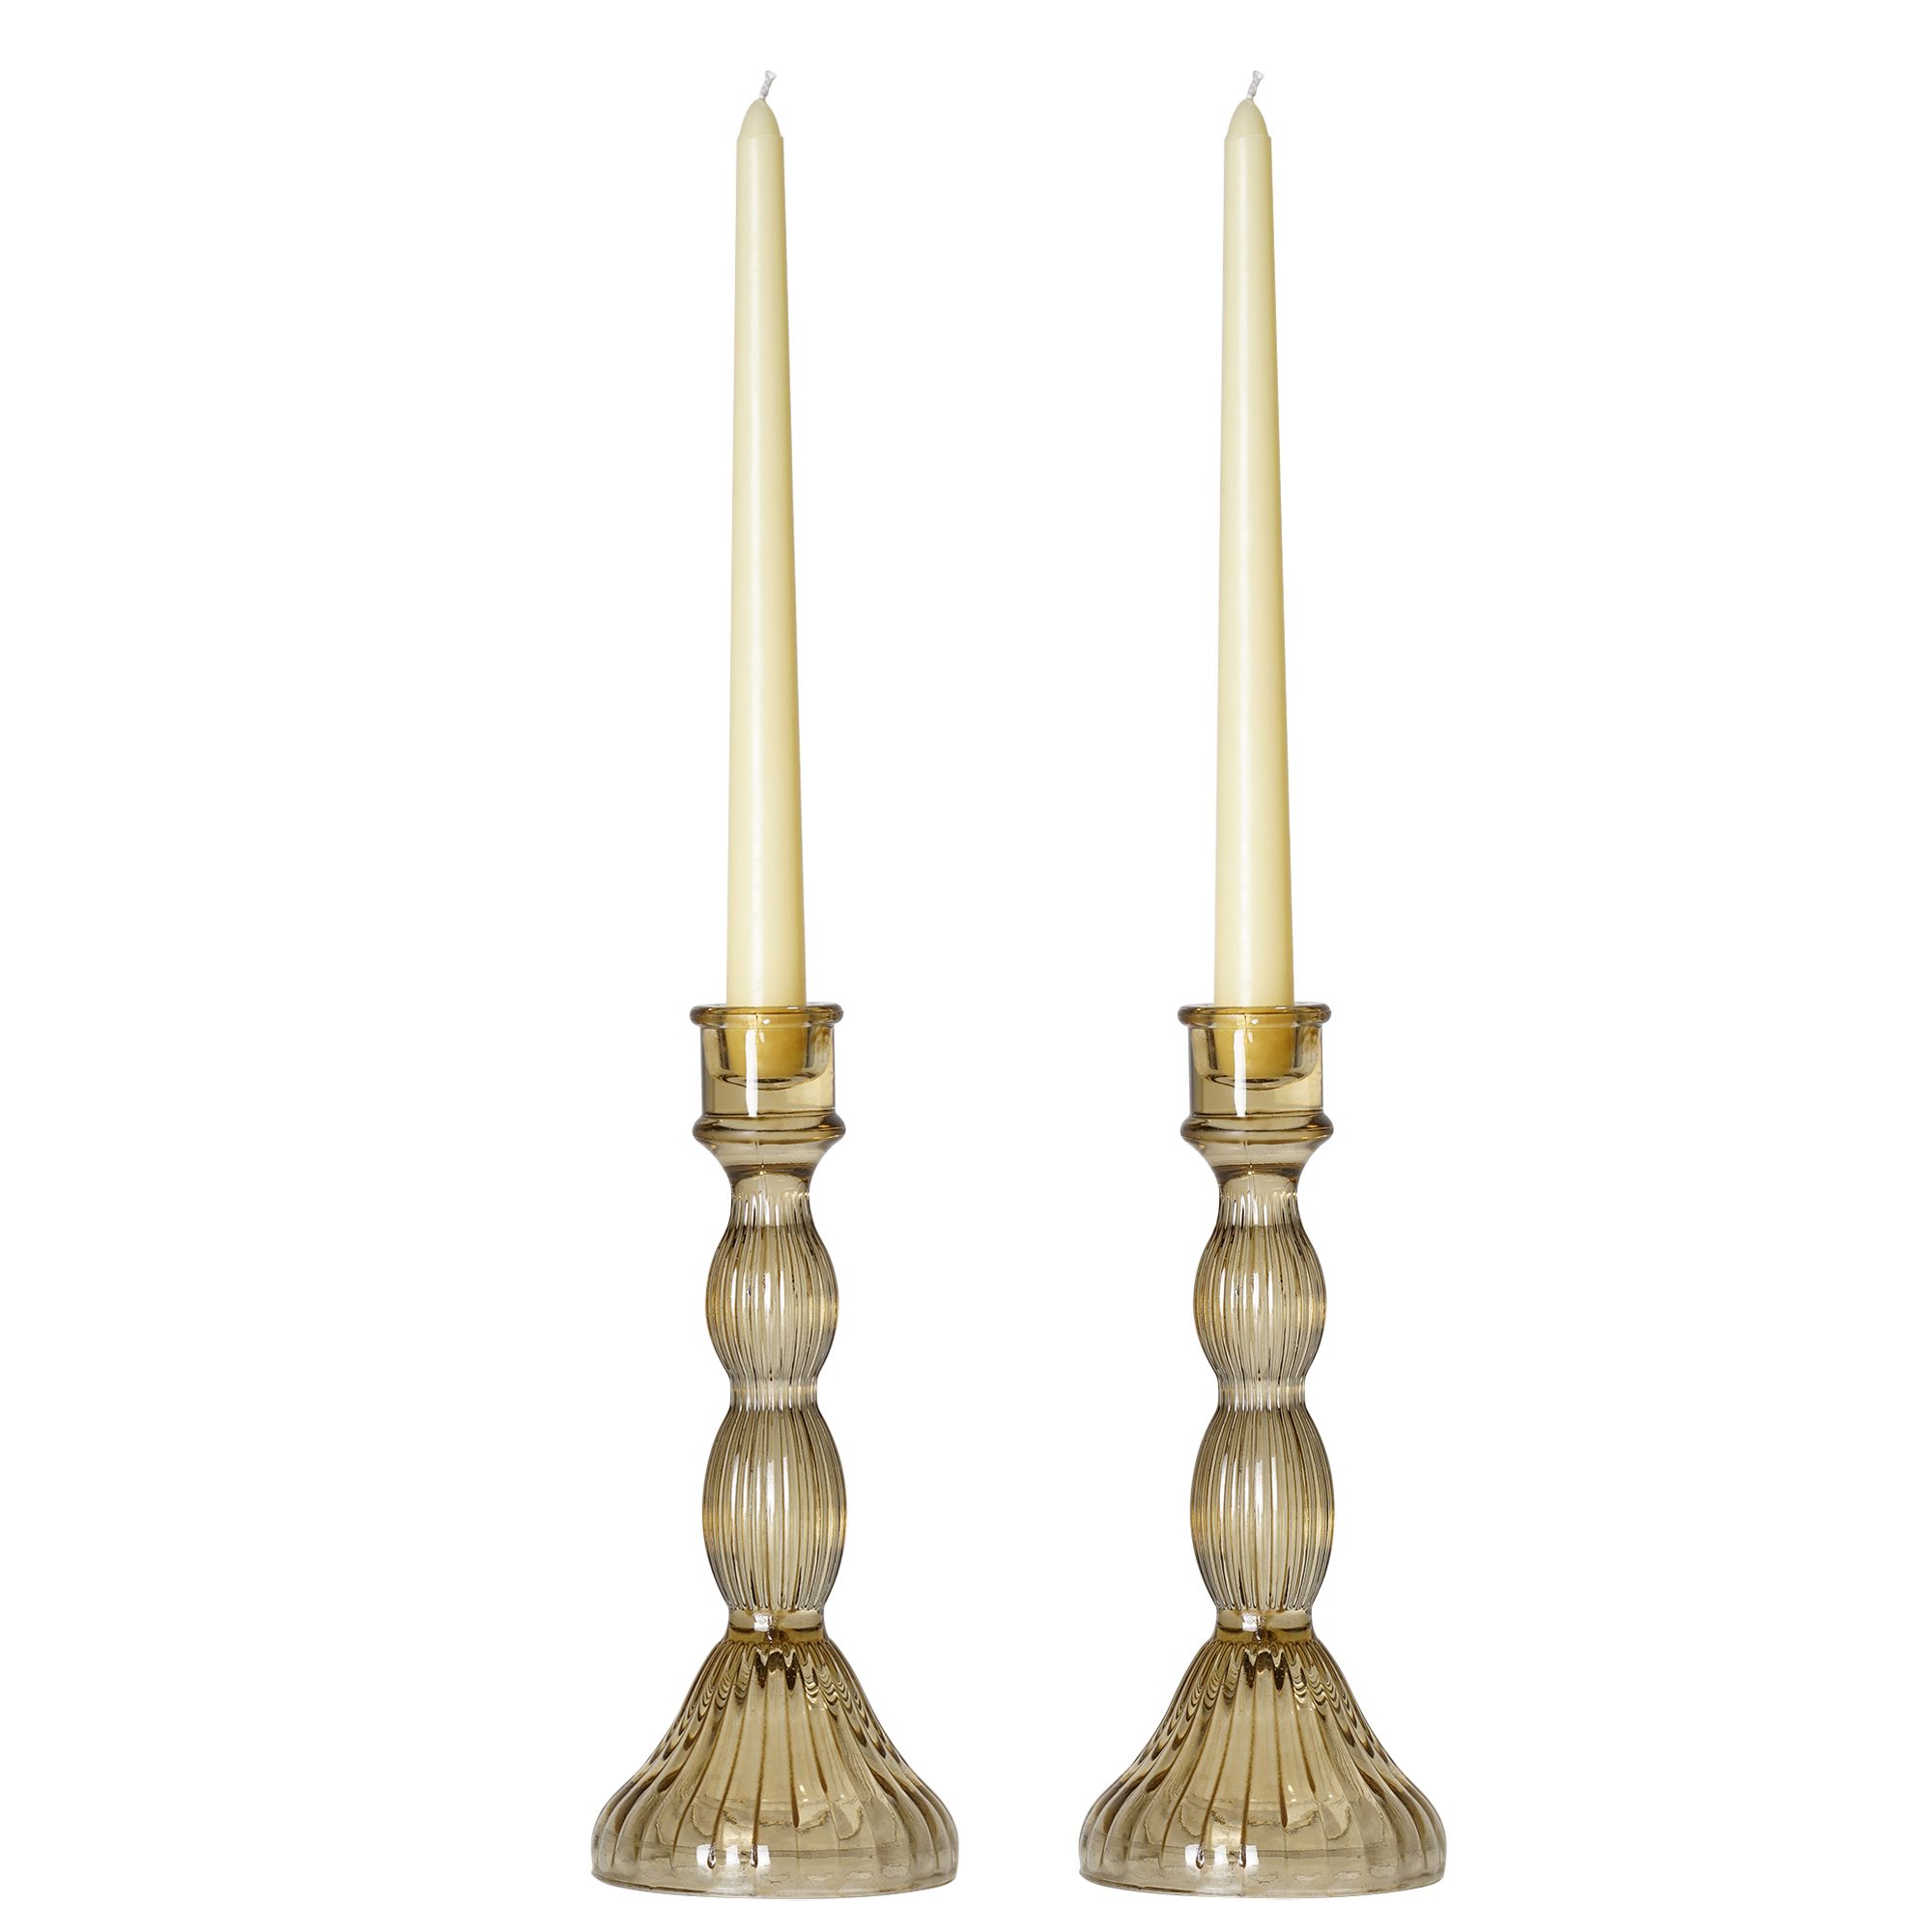 Crystal Art Gallery Traditional Glass Candle Stick Holder Set of 2, Neutrals | Walmart (US)